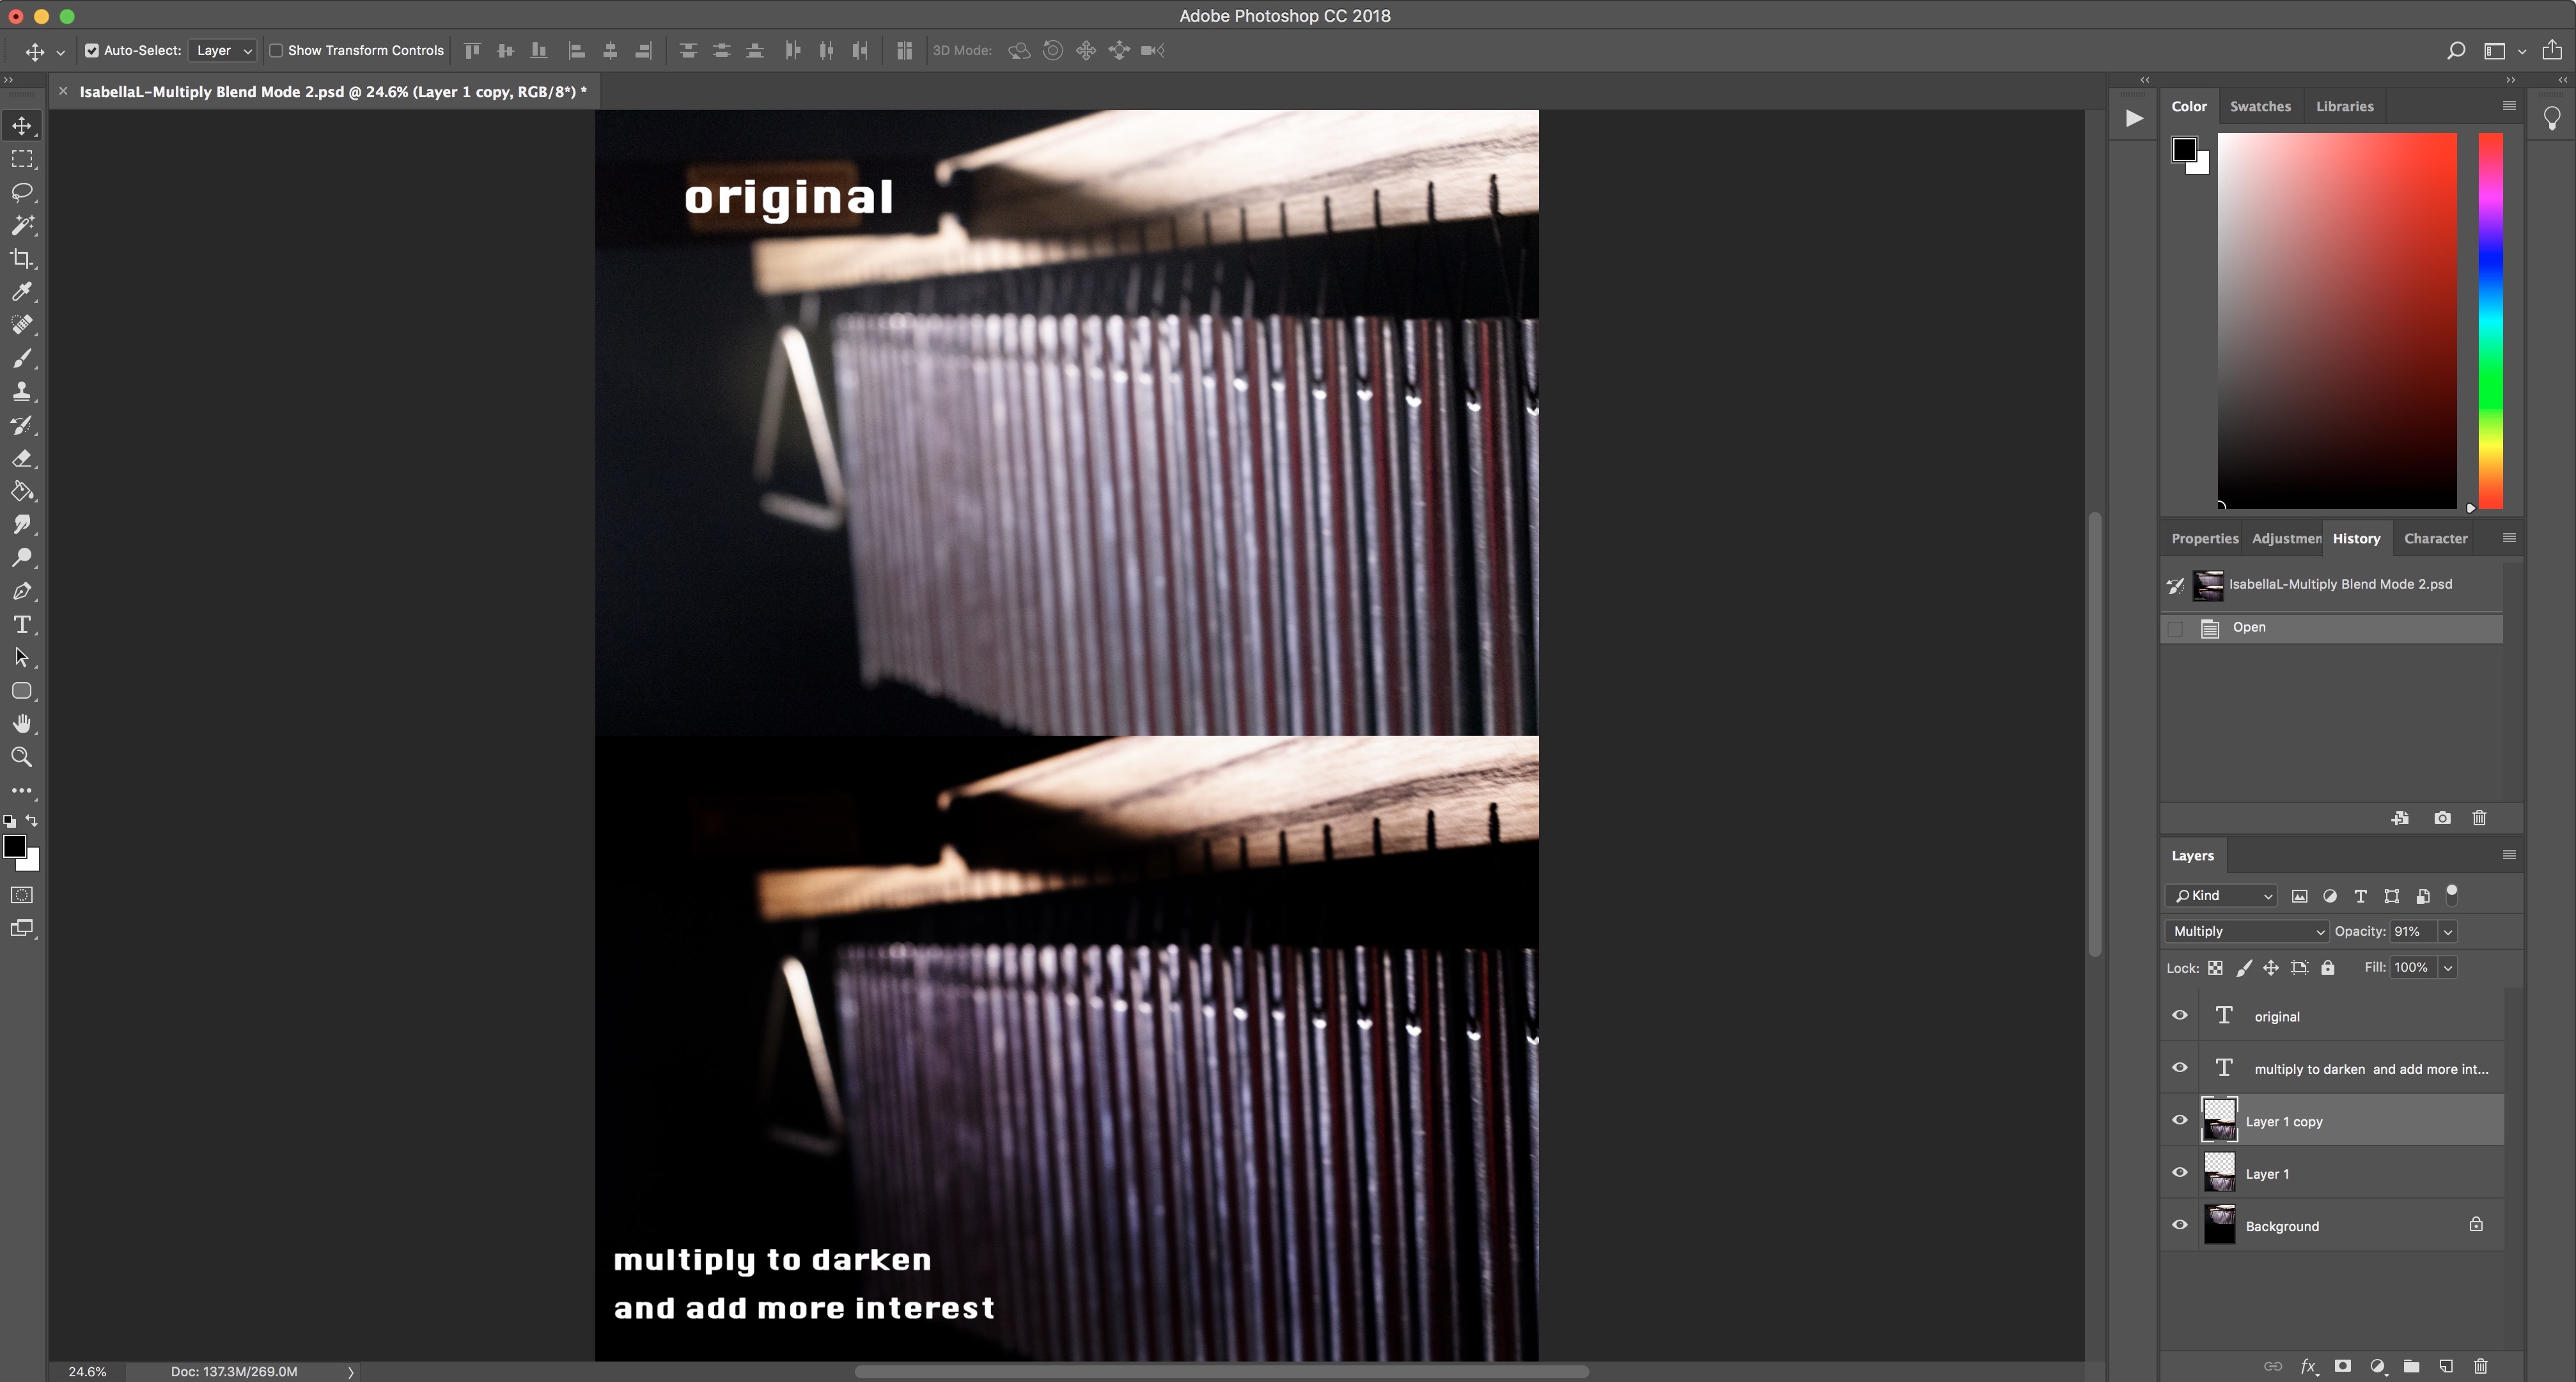 Screenshot of editing photo of chimes on Photoshop